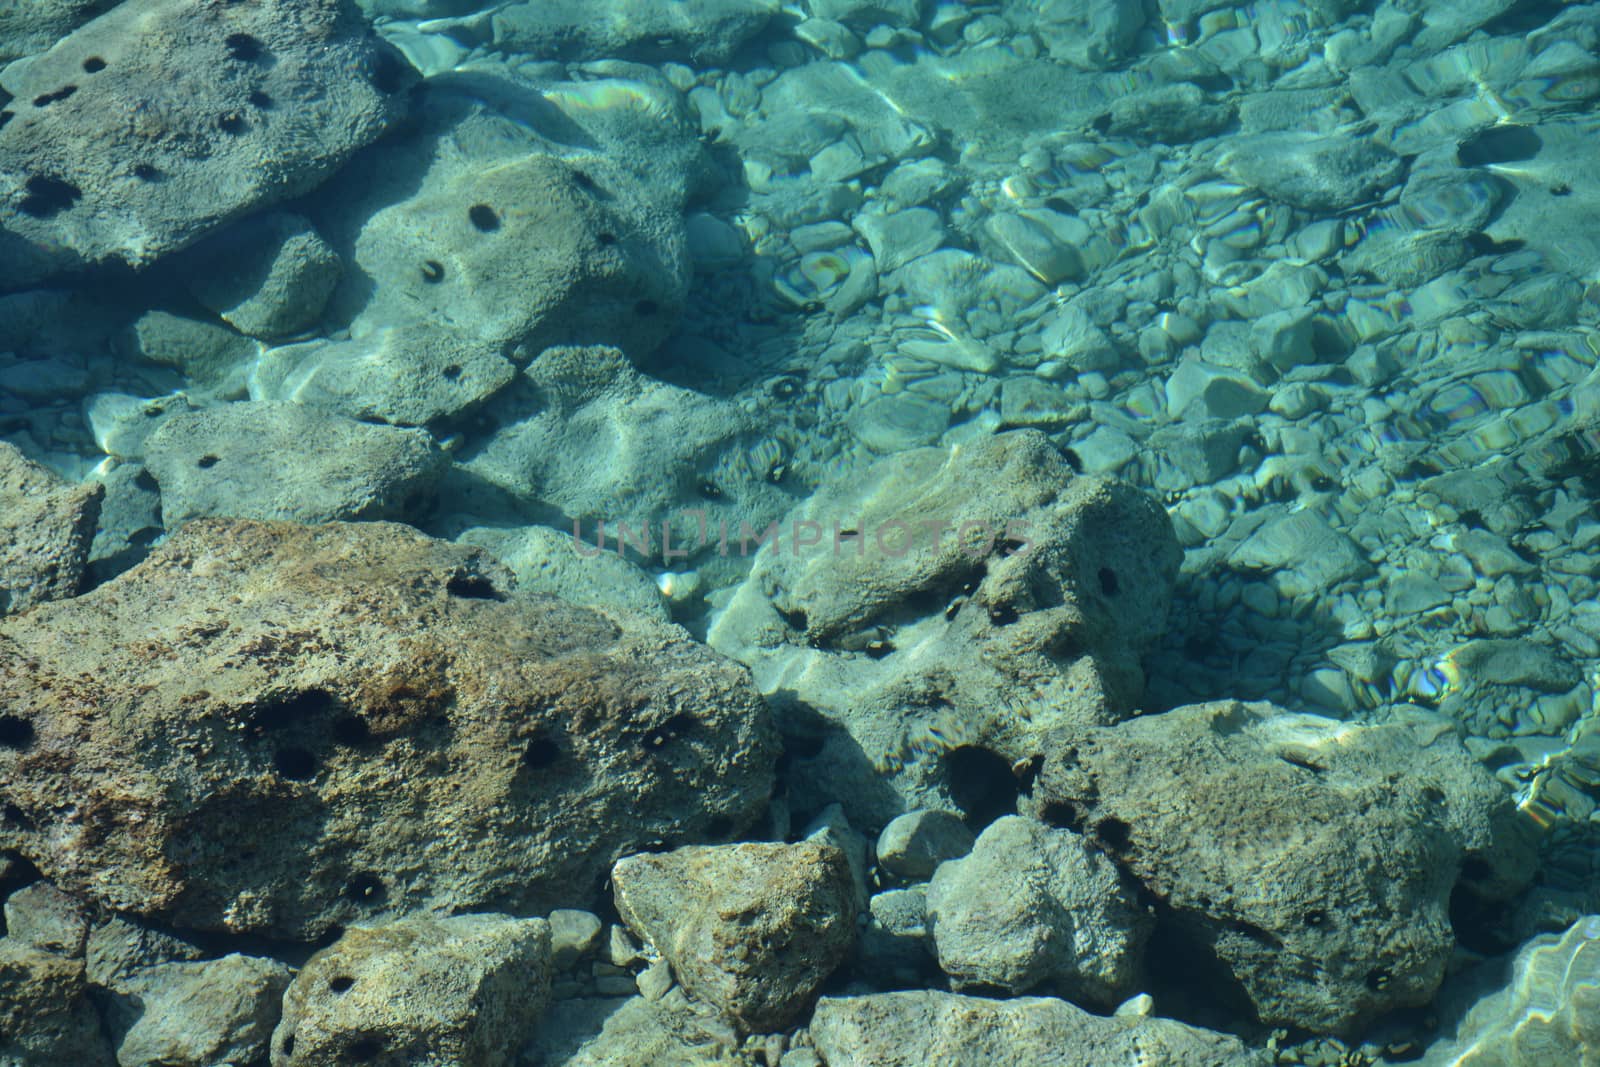 View from above to the sea bottom - rocks and sea urchins